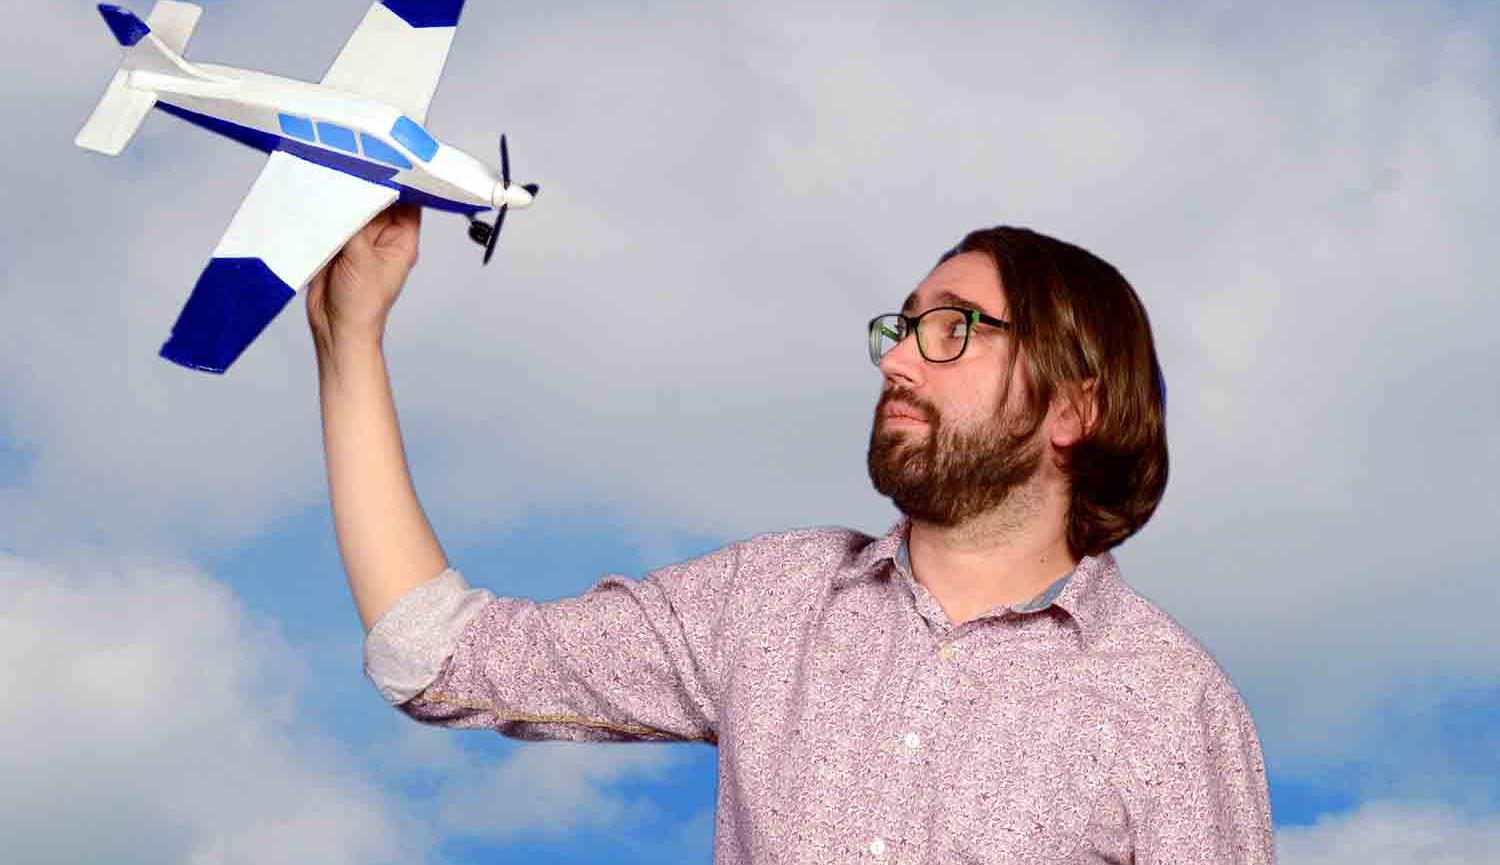 Man holding model airplane in the air